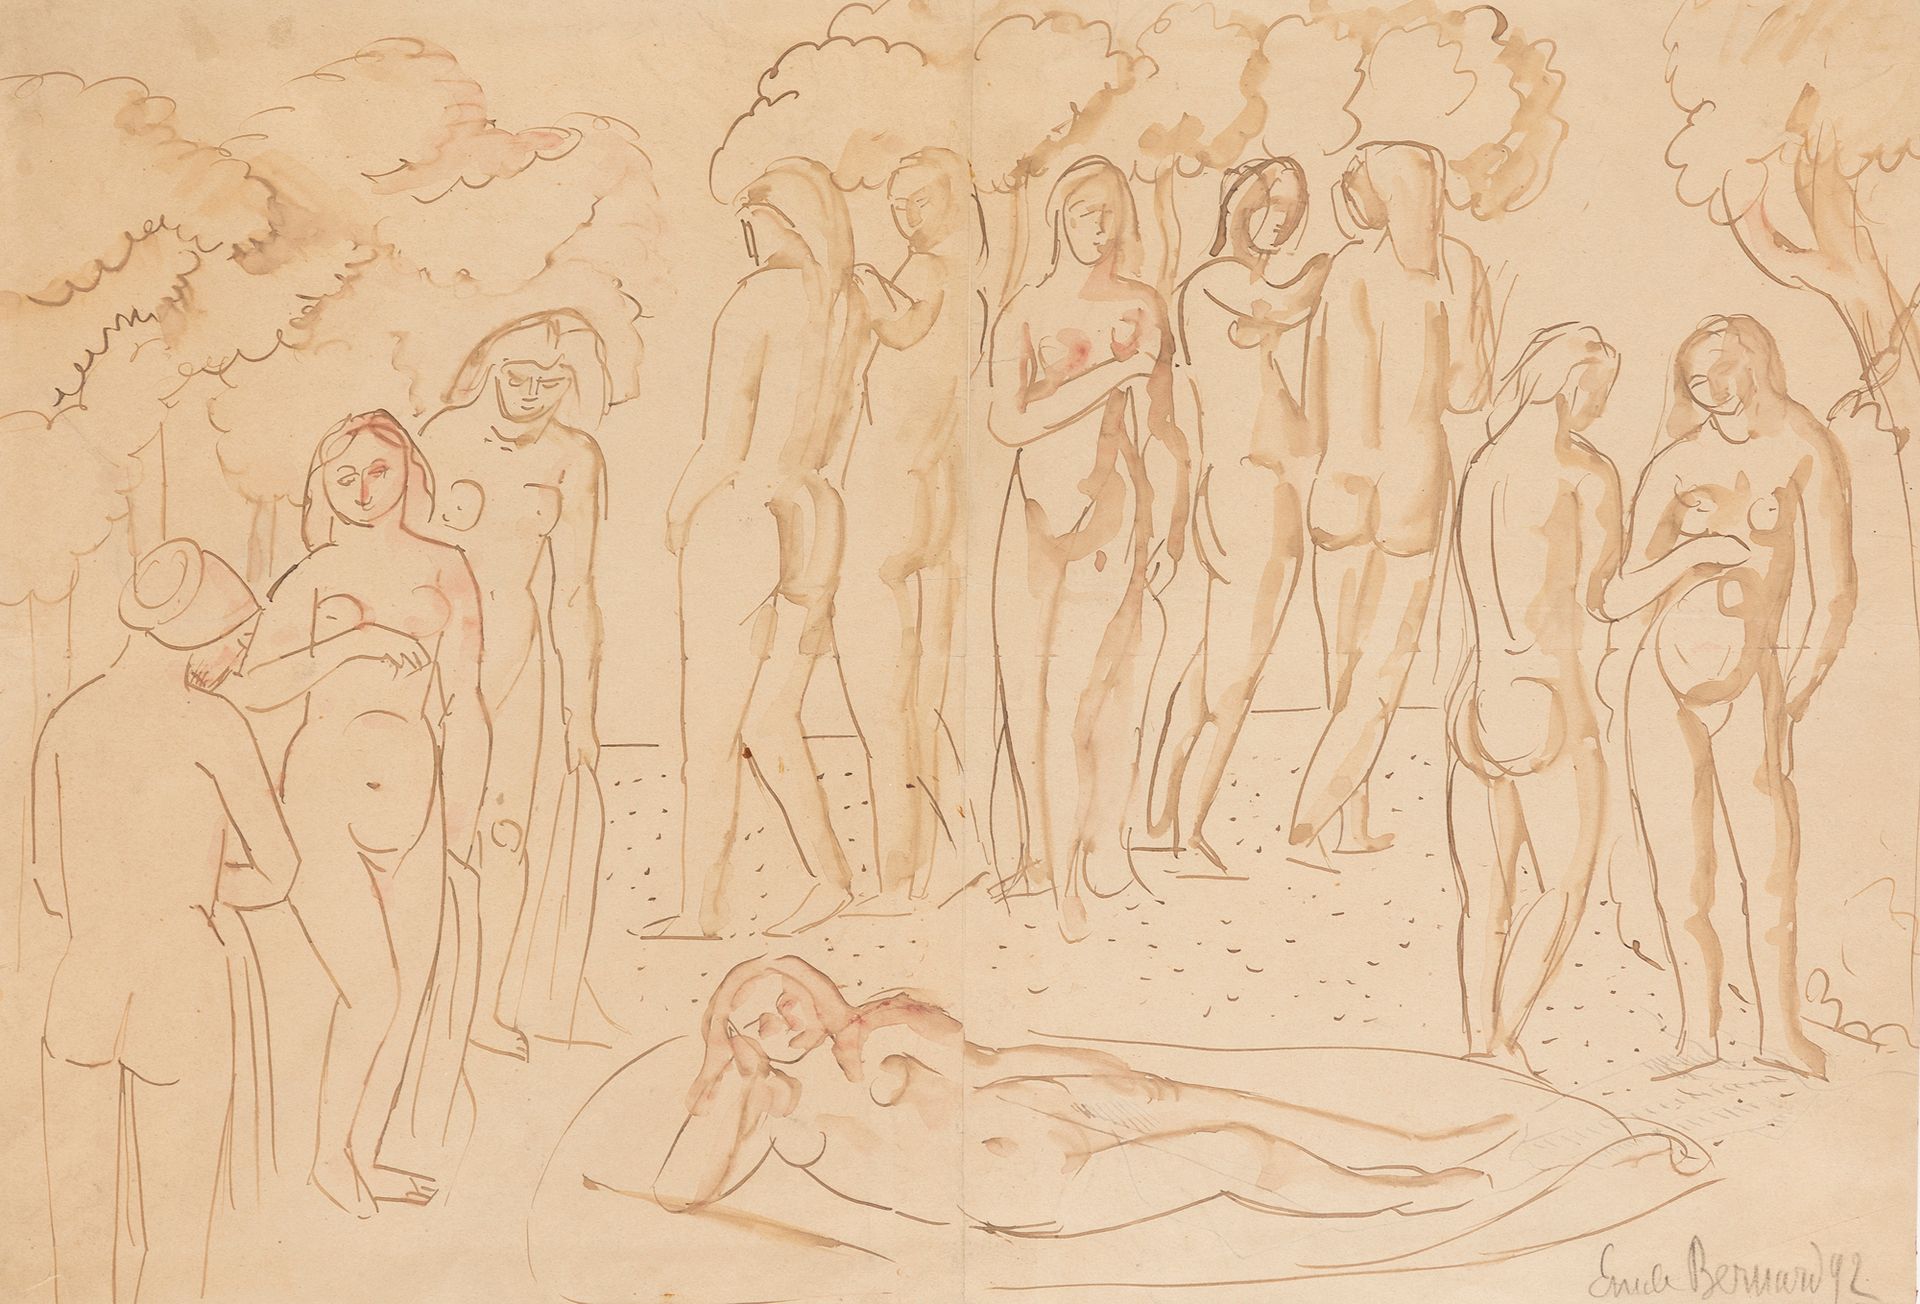 Null Emile BERNARD (1868-1941)

The Bathers - 1892

Ink and wash on paper

Signe&hellip;